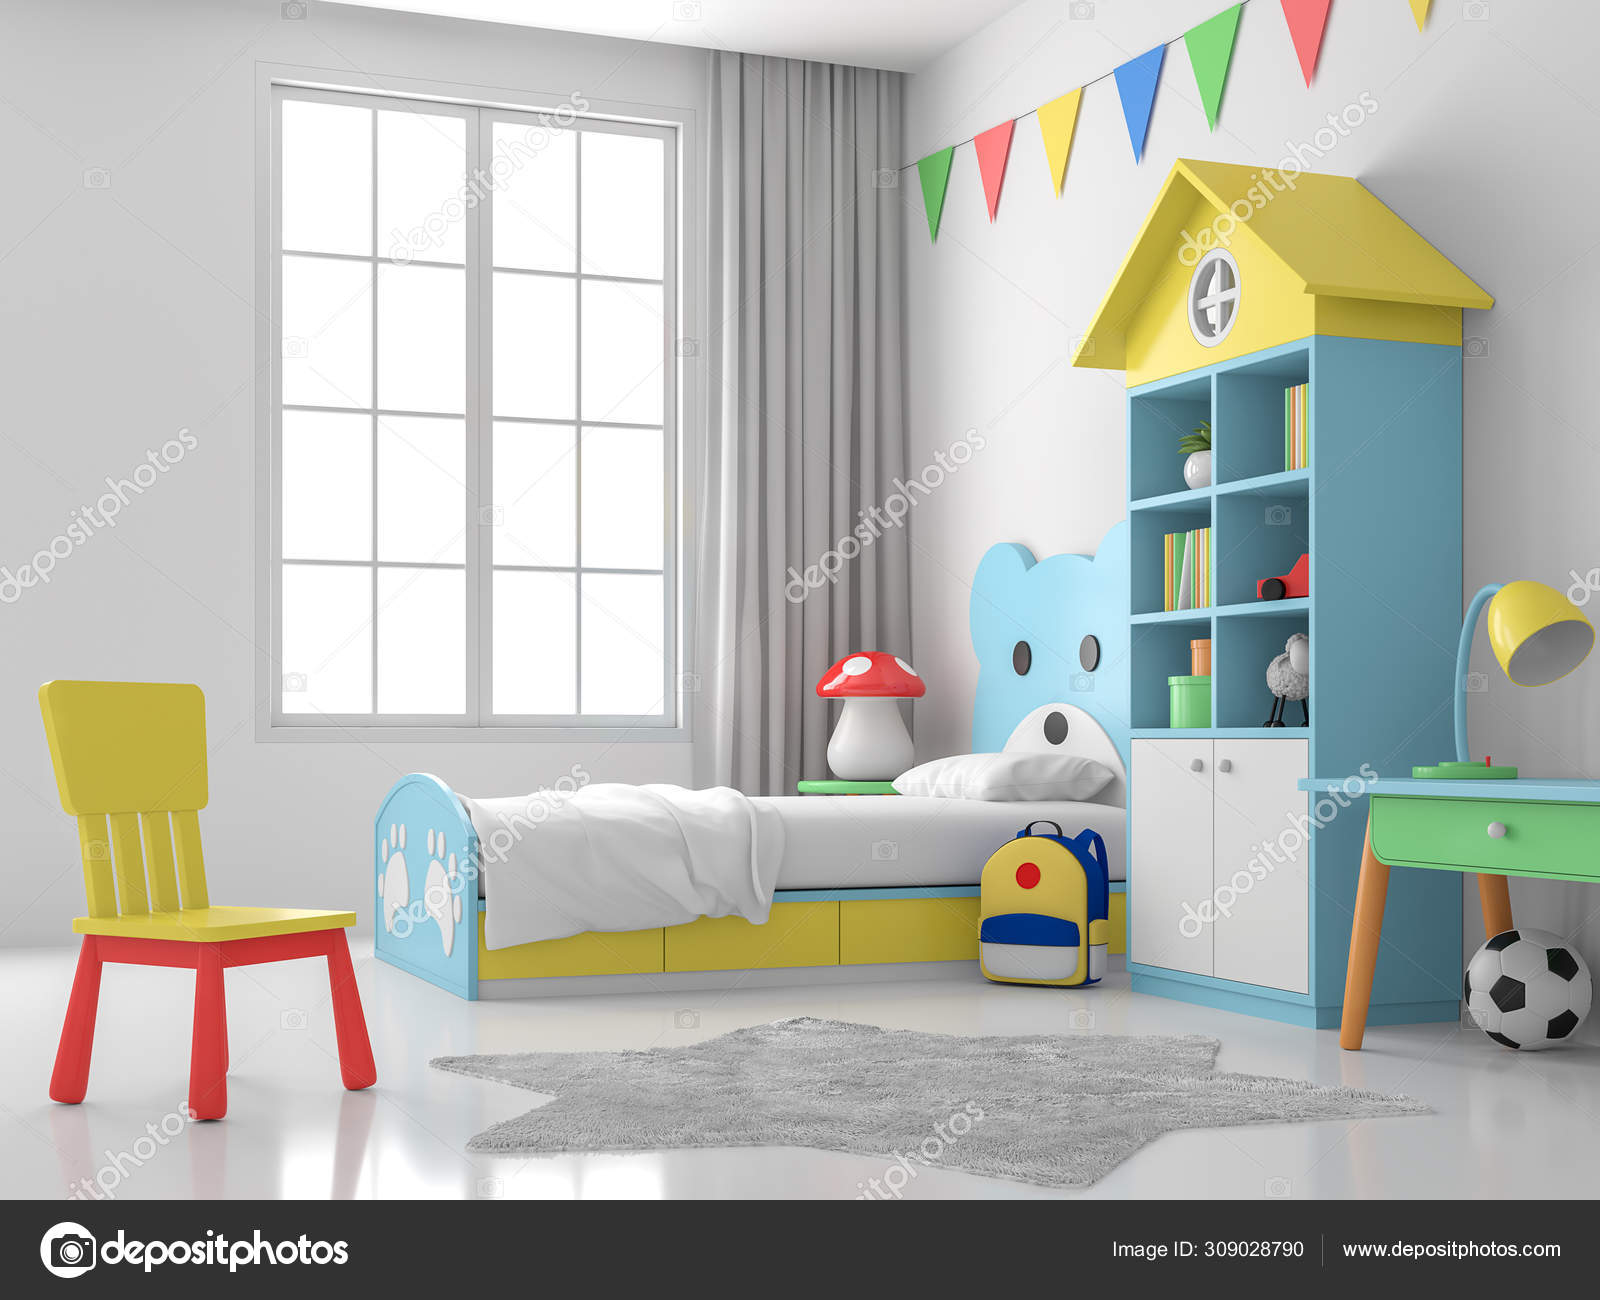 childrens bedroom chair